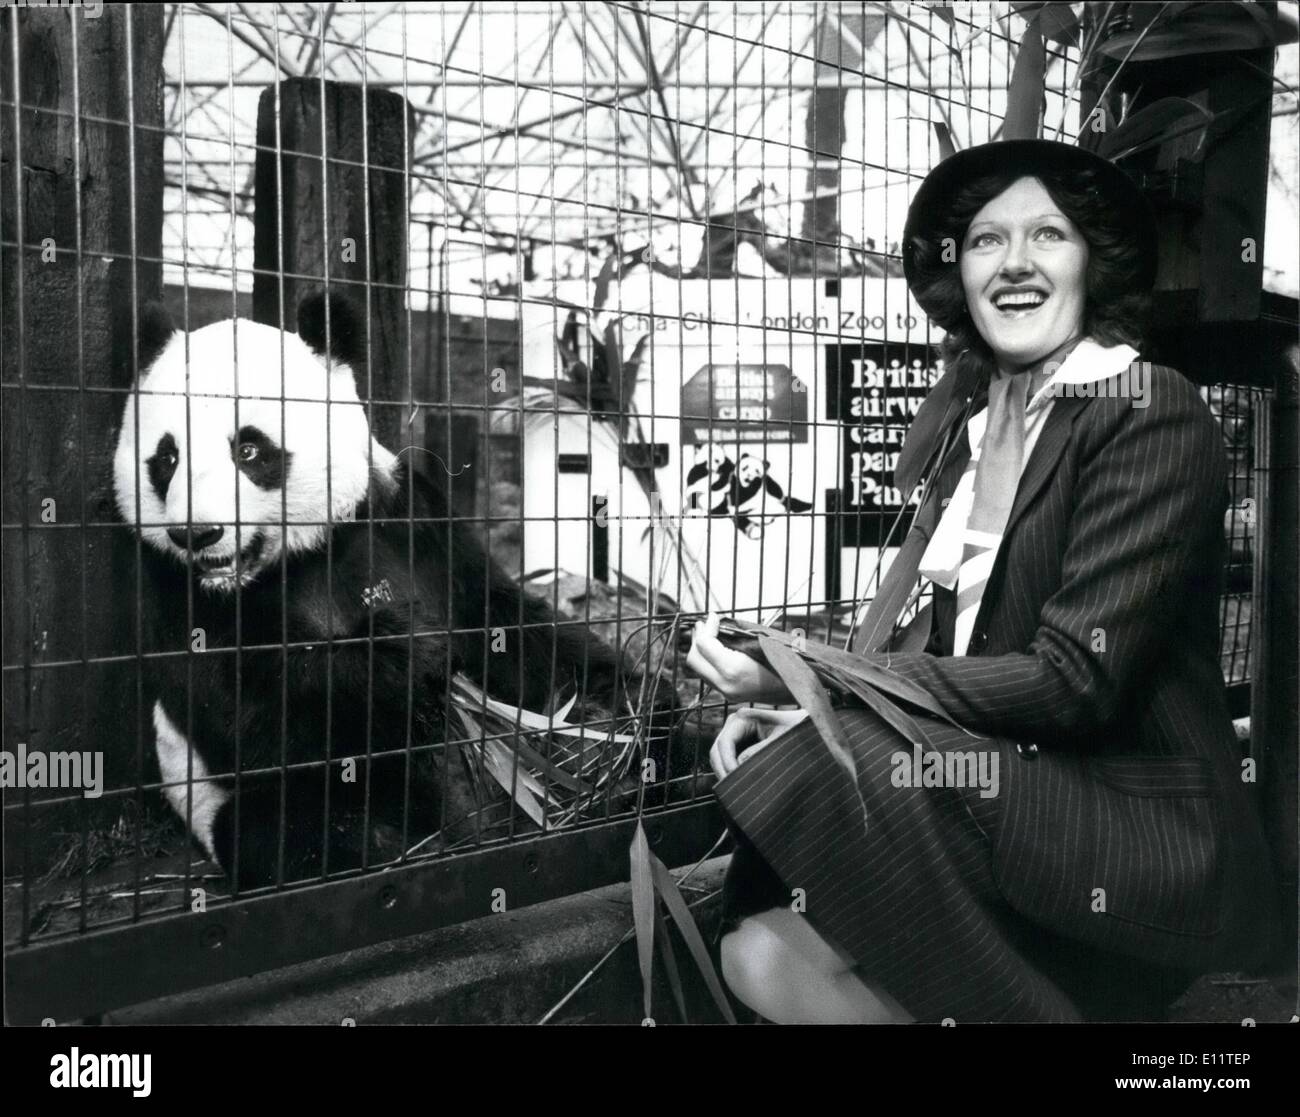 Mar. 03, 1980 - Chia Chia London's Giant Panda Meets His Air hostees Before Flying Off to America - London Zoo's Giant Panda, Chia-Chia, met British Airways Stewardess, Jescqlinc Walker, Who gave jo, his Flight briefing for his journey to America on Thursday, March 5th. Eight and a half year old Chia Chia Flies Cat from London;s Heethrow Airport for his Assinment worth ten Year old Ling-Ling. Washington Zoo's female Panda. He is Travelling on Ba's747 Fasighter, which is the only Jumbo freighter in the country. to Kennedy Airport, New York, and from there to Washinton Zoo by road Stock Photo